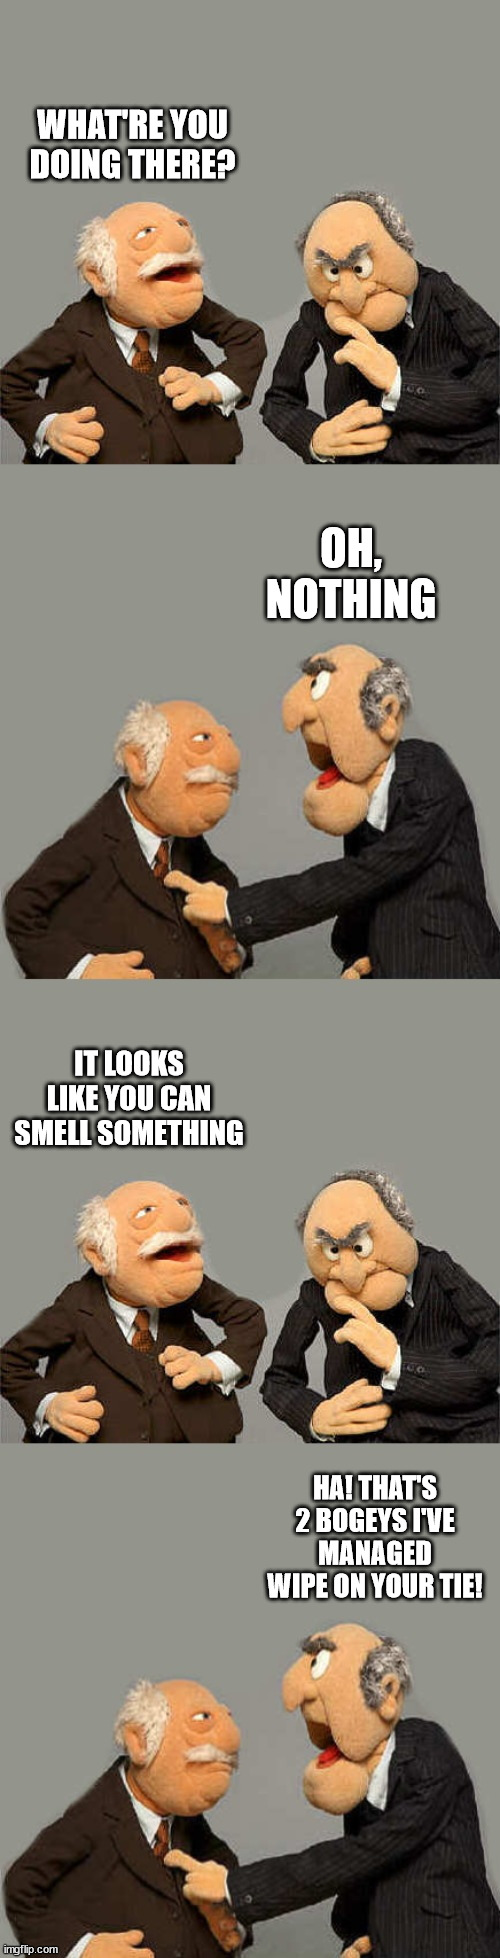 Childish games for old men | WHAT'RE YOU DOING THERE? OH, NOTHING; IT LOOKS LIKE YOU CAN SMELL SOMETHING; HA! THAT'S 2 BOGEYS I'VE MANAGED WIPE ON YOUR TIE! | image tagged in the meme with no name | made w/ Imgflip meme maker